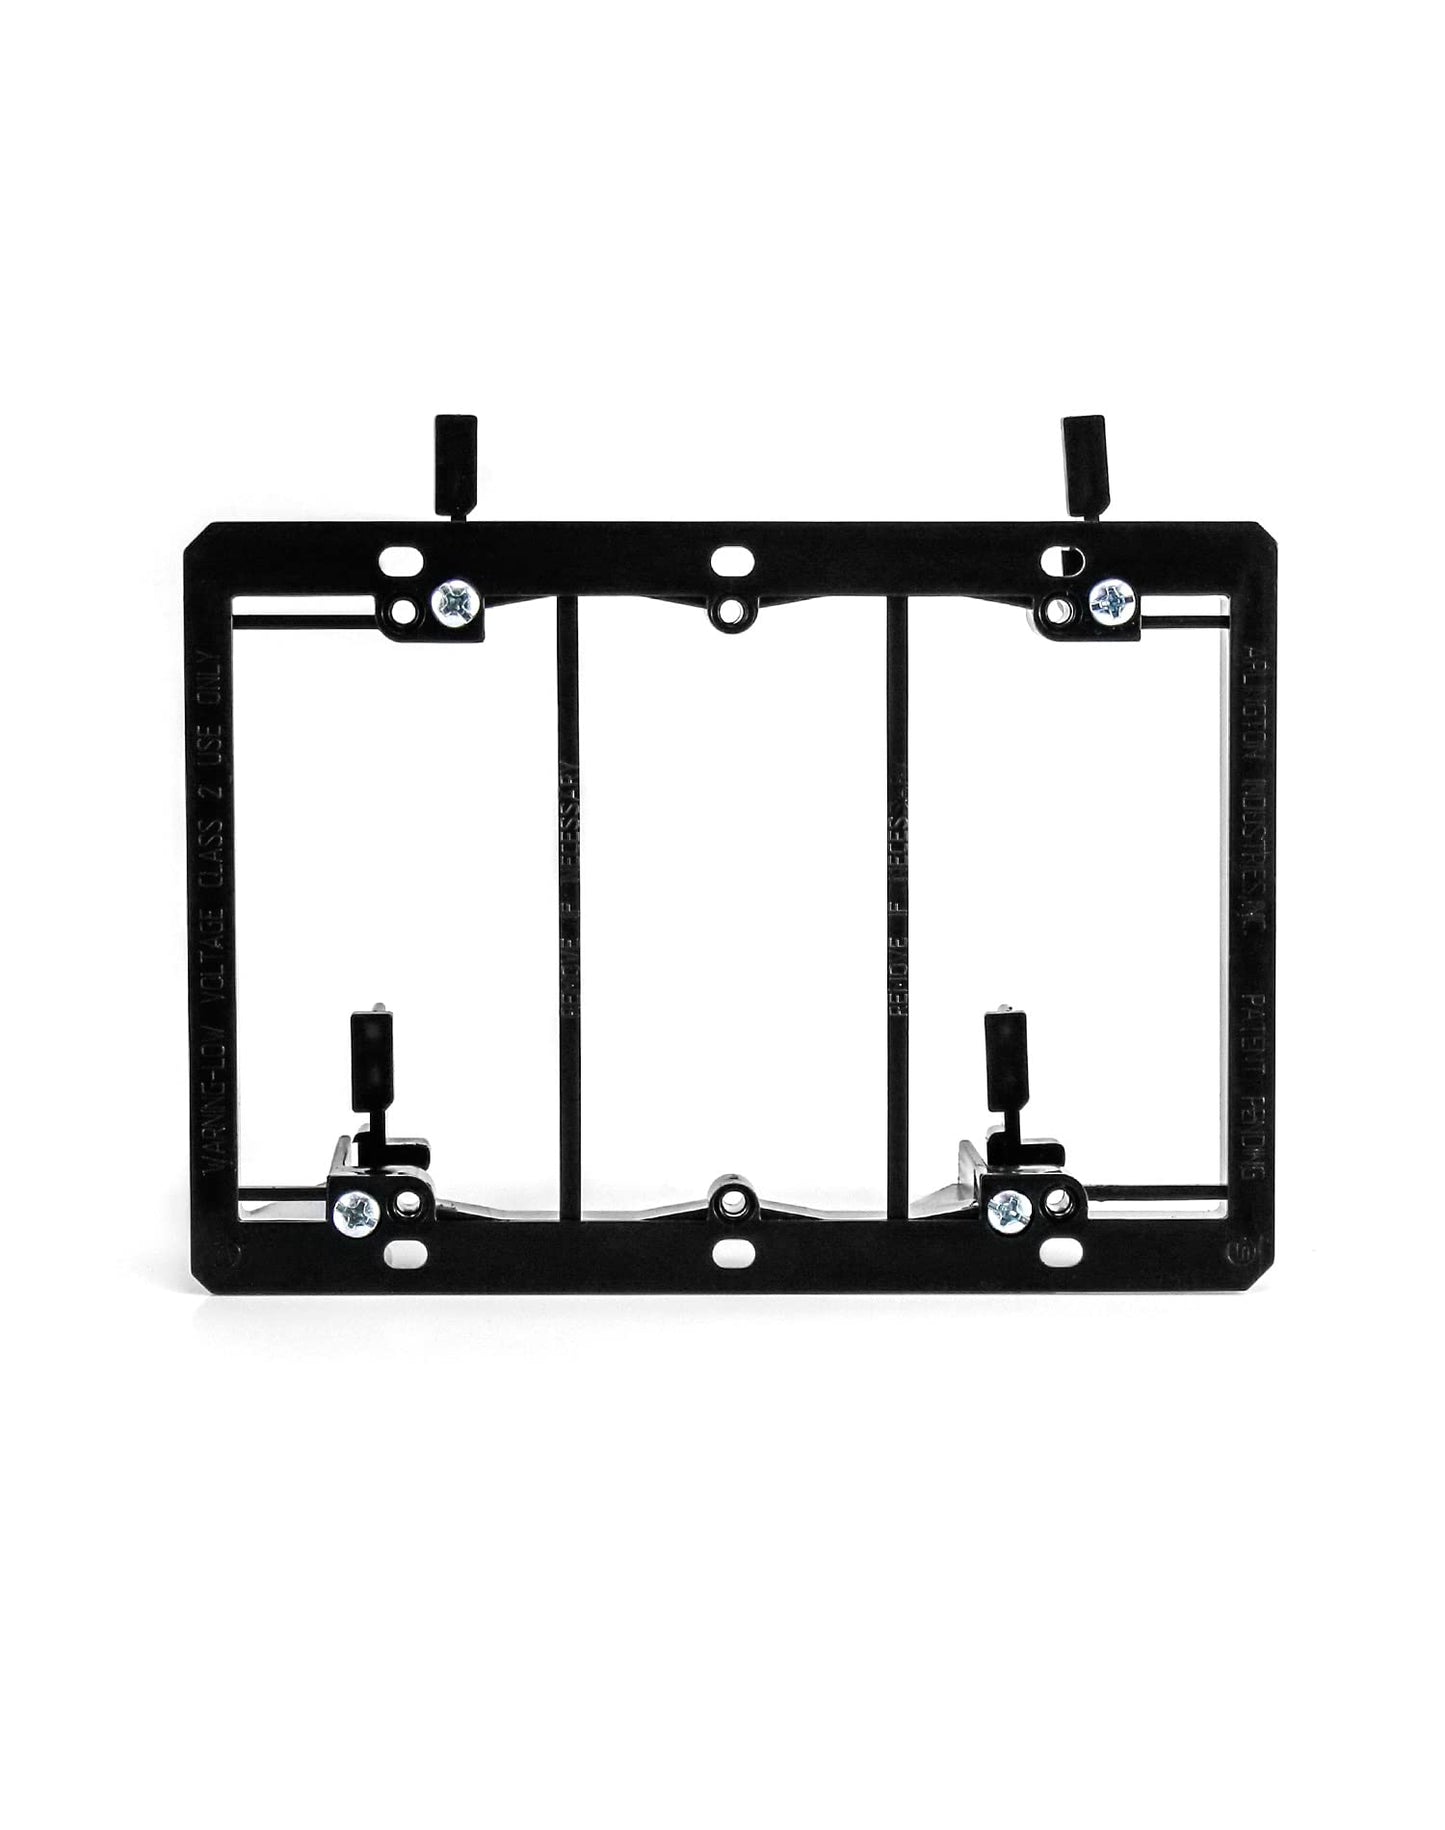 QWORK Low Voltage Dual Gang Mounting Bracket, 10 Pack 2 Gang Mounting Wall Plate Bracket for Telephone Wires, Network Cables